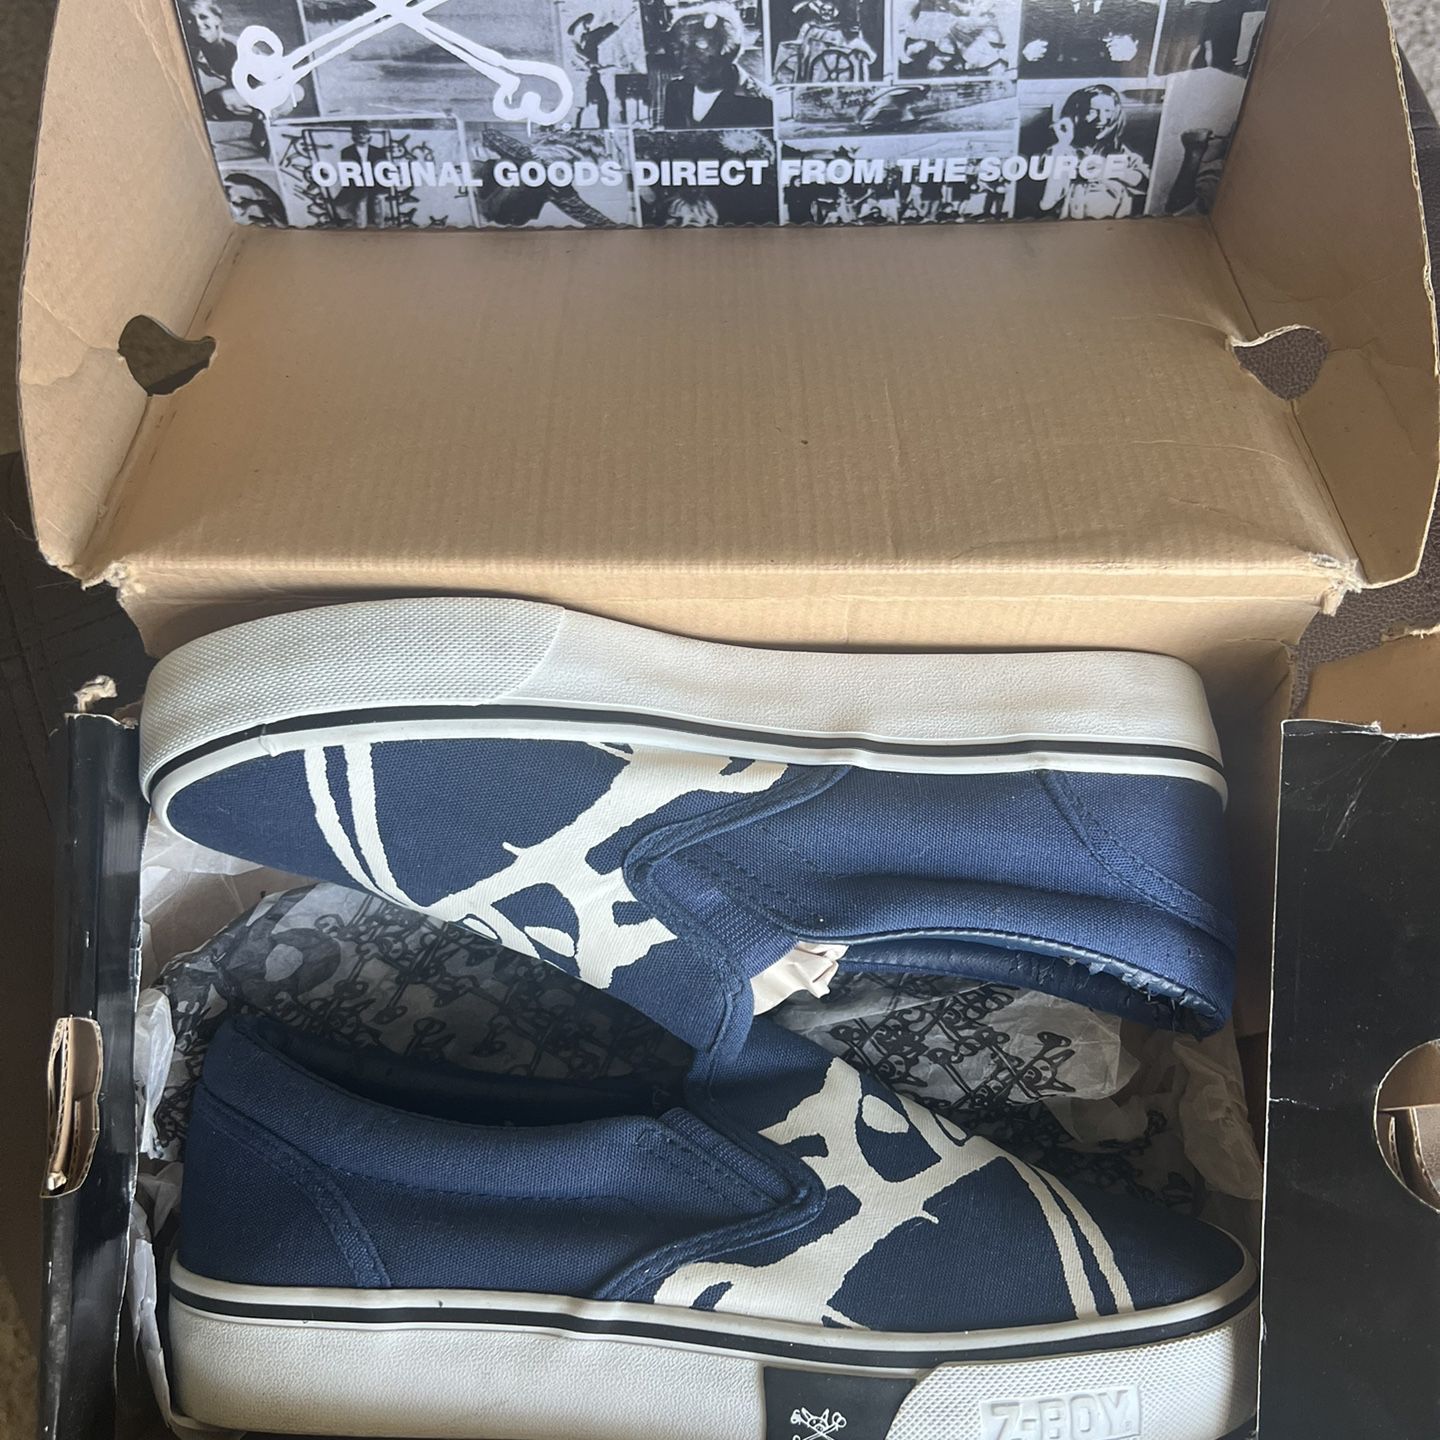 Z-Boy Dogtown Shoes - Vintage New In Box 